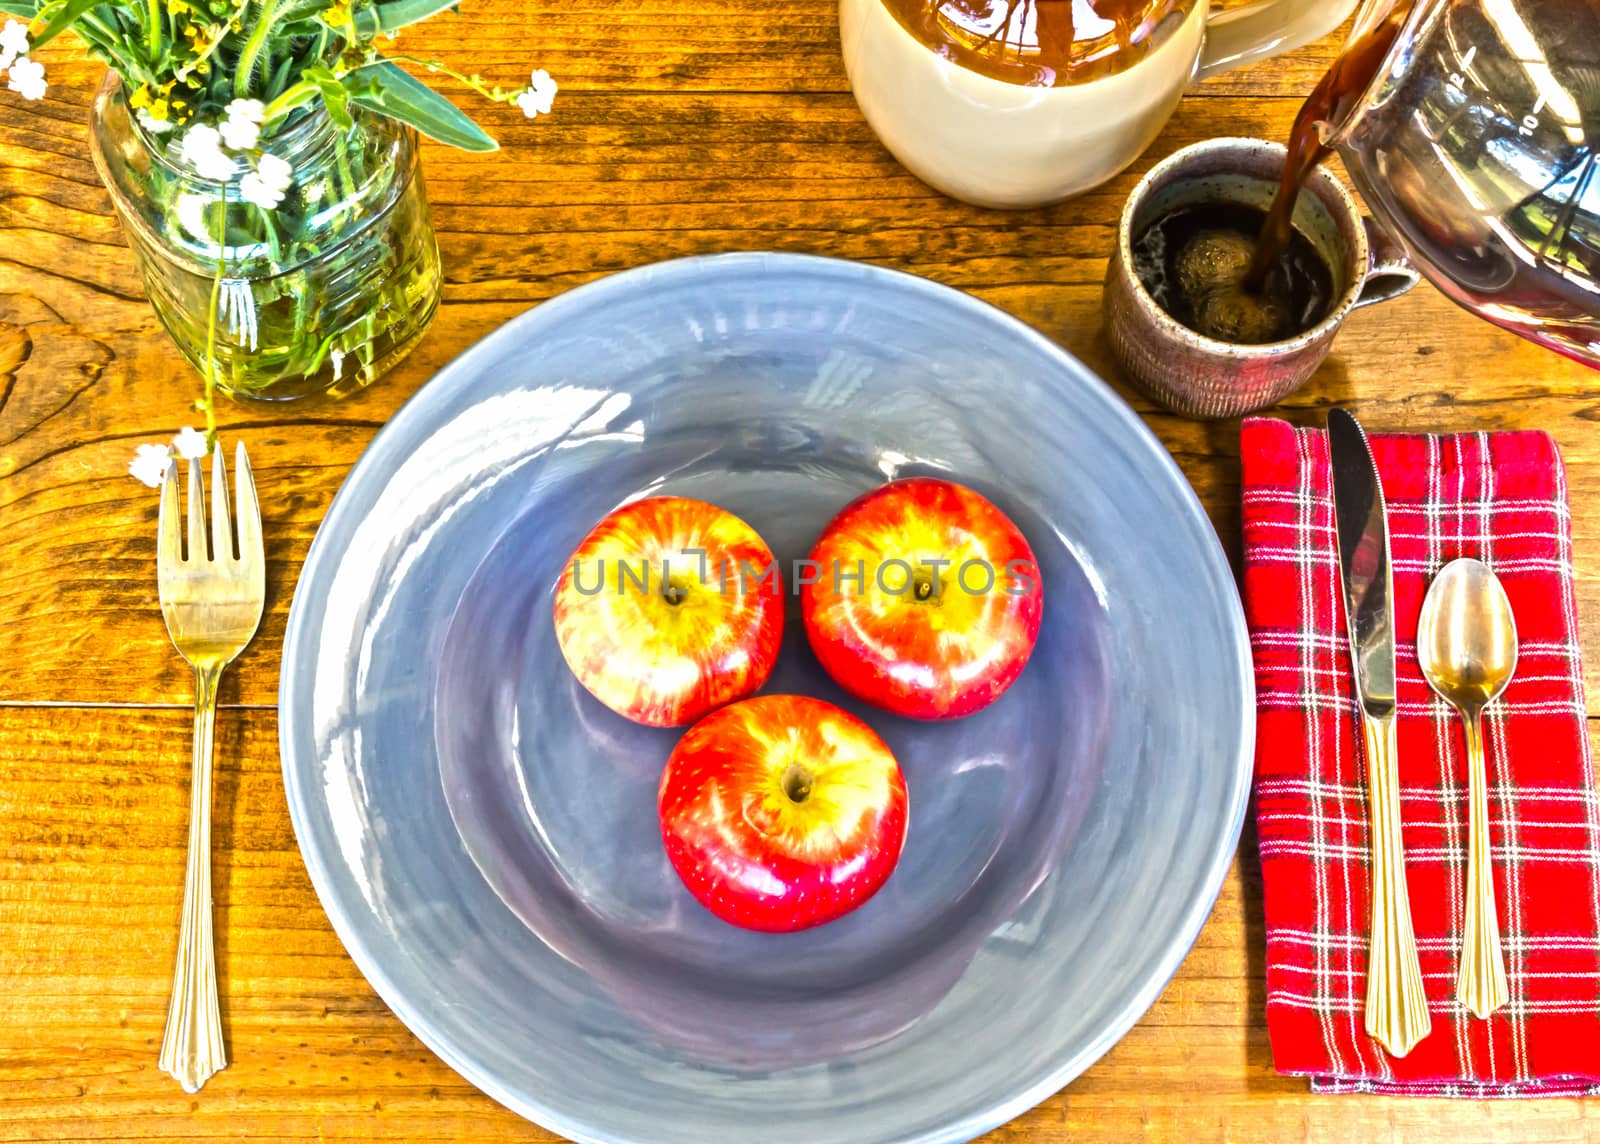 Place Setting With Red Apples, Flowers and Crockery on Wooden Table With Knots and Brewed Coffee Poured in Cup